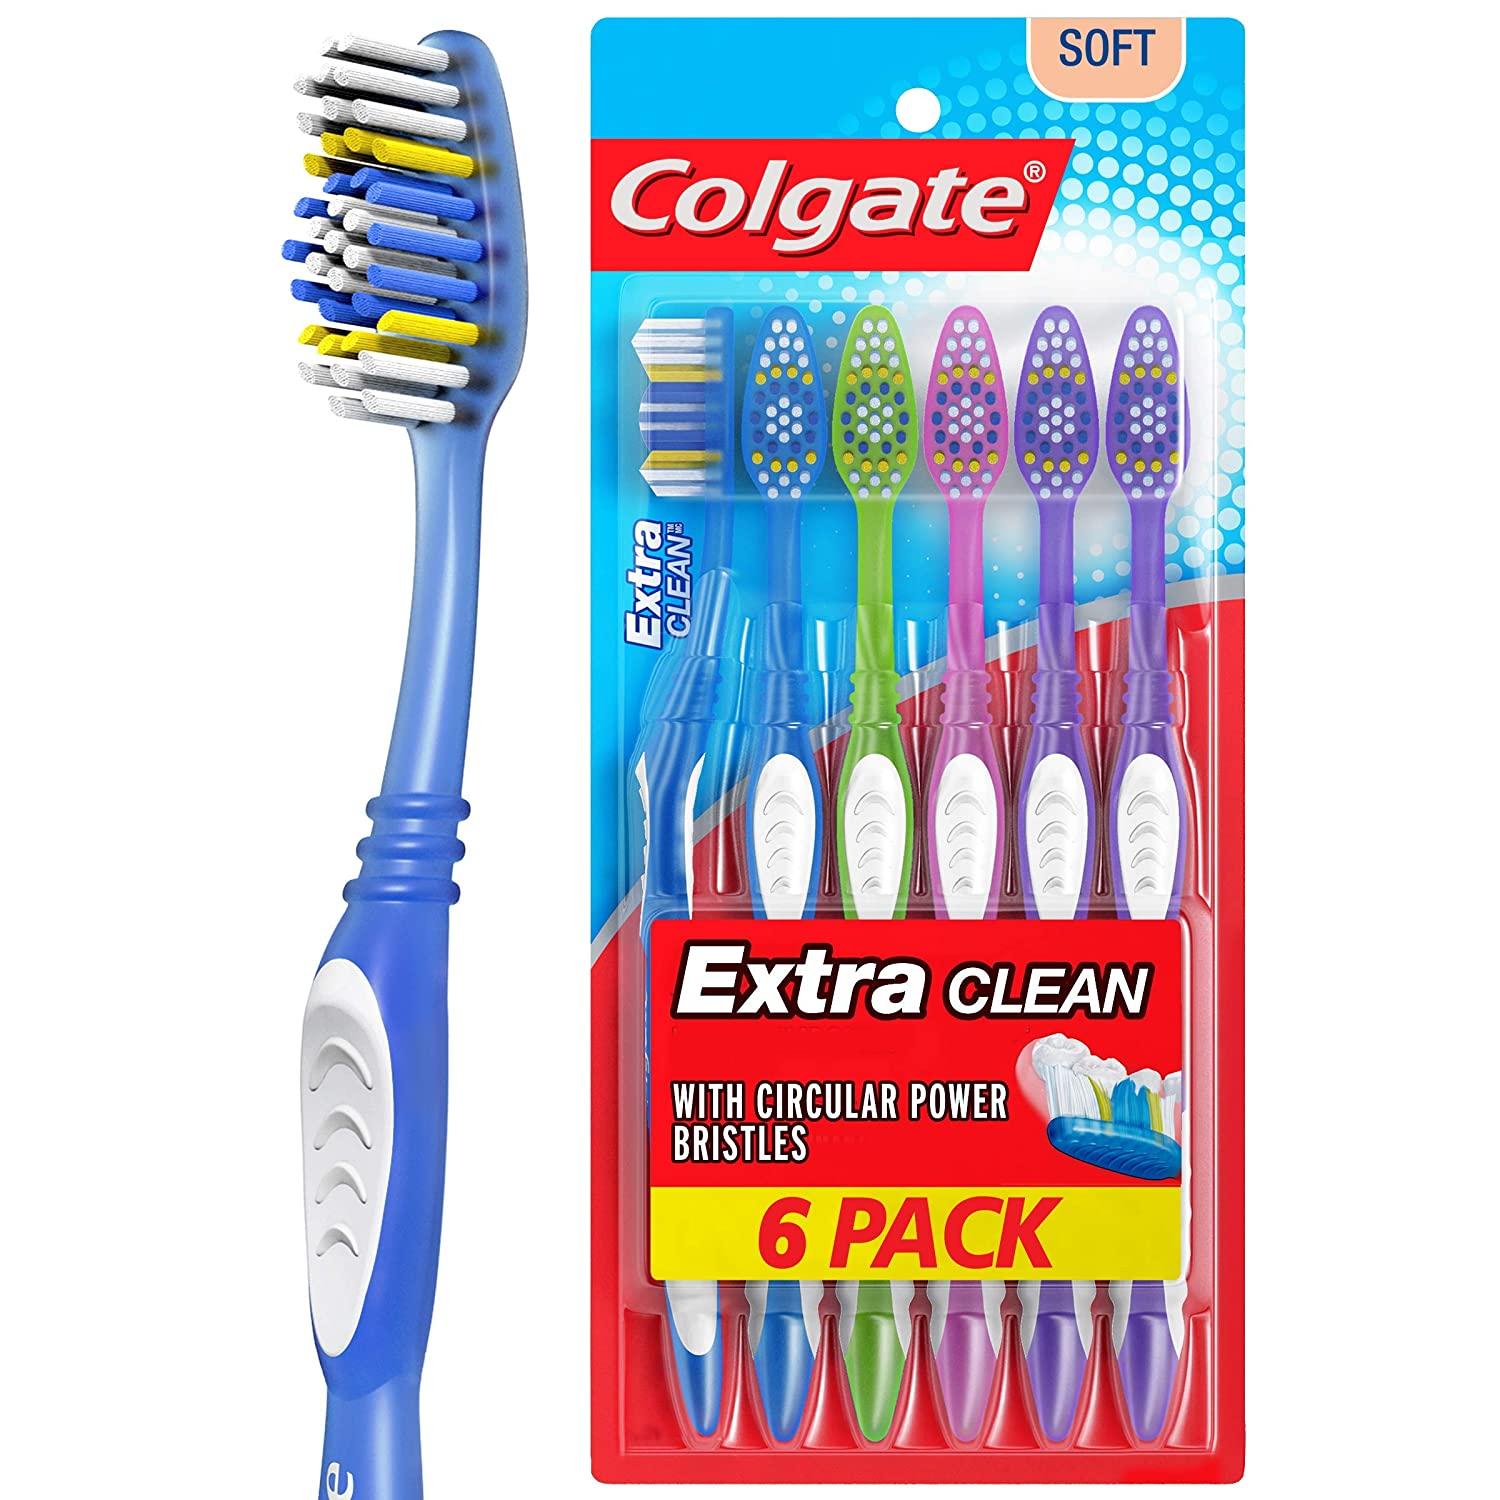 6 Colgate Extra Clean Toothbrush for $2.58 Shipped